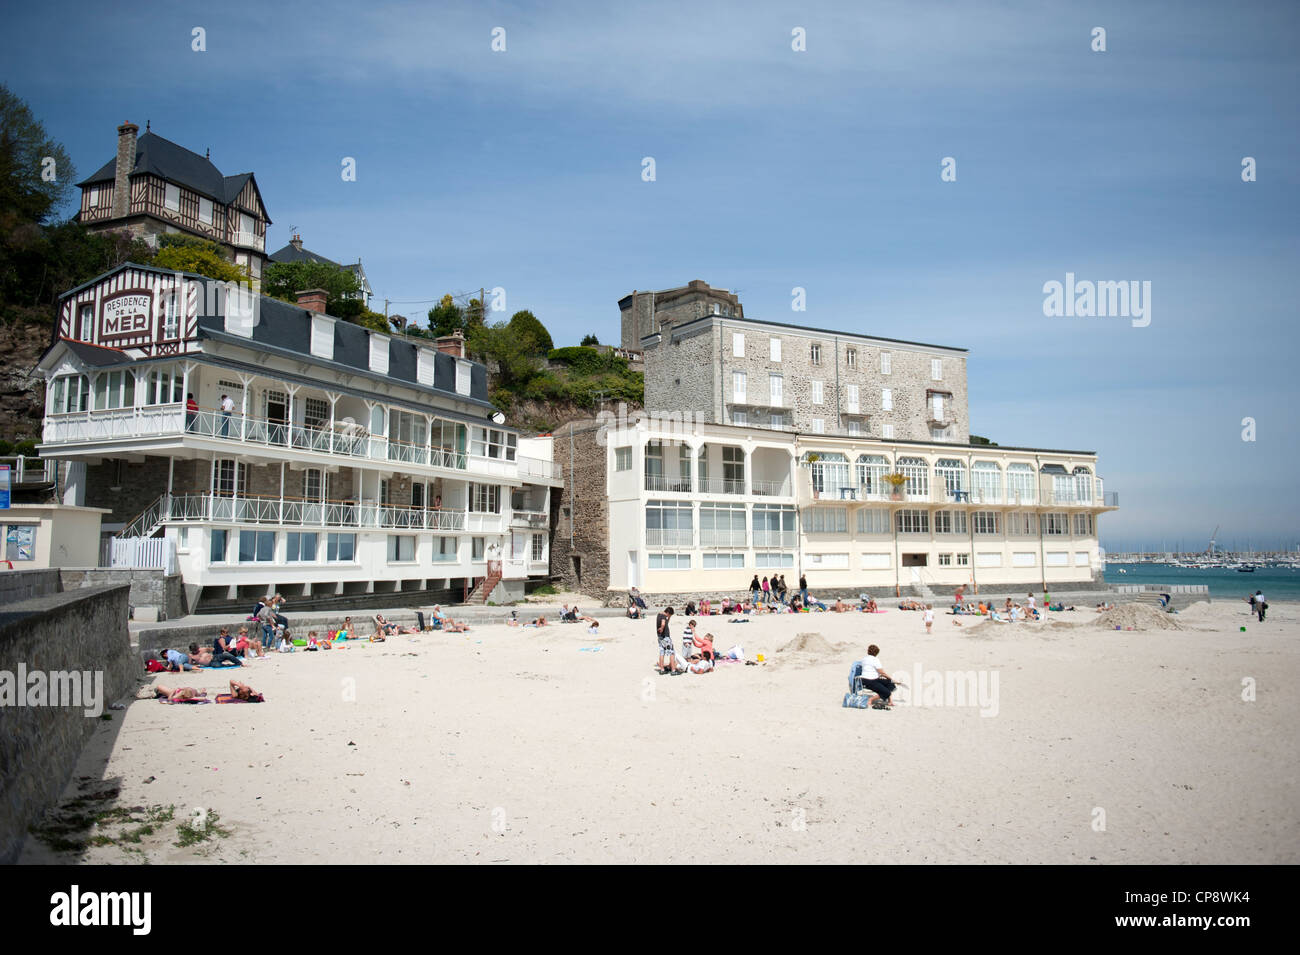 St Cast Le Guildo High Resolution Stock Photography and Images - Alamy